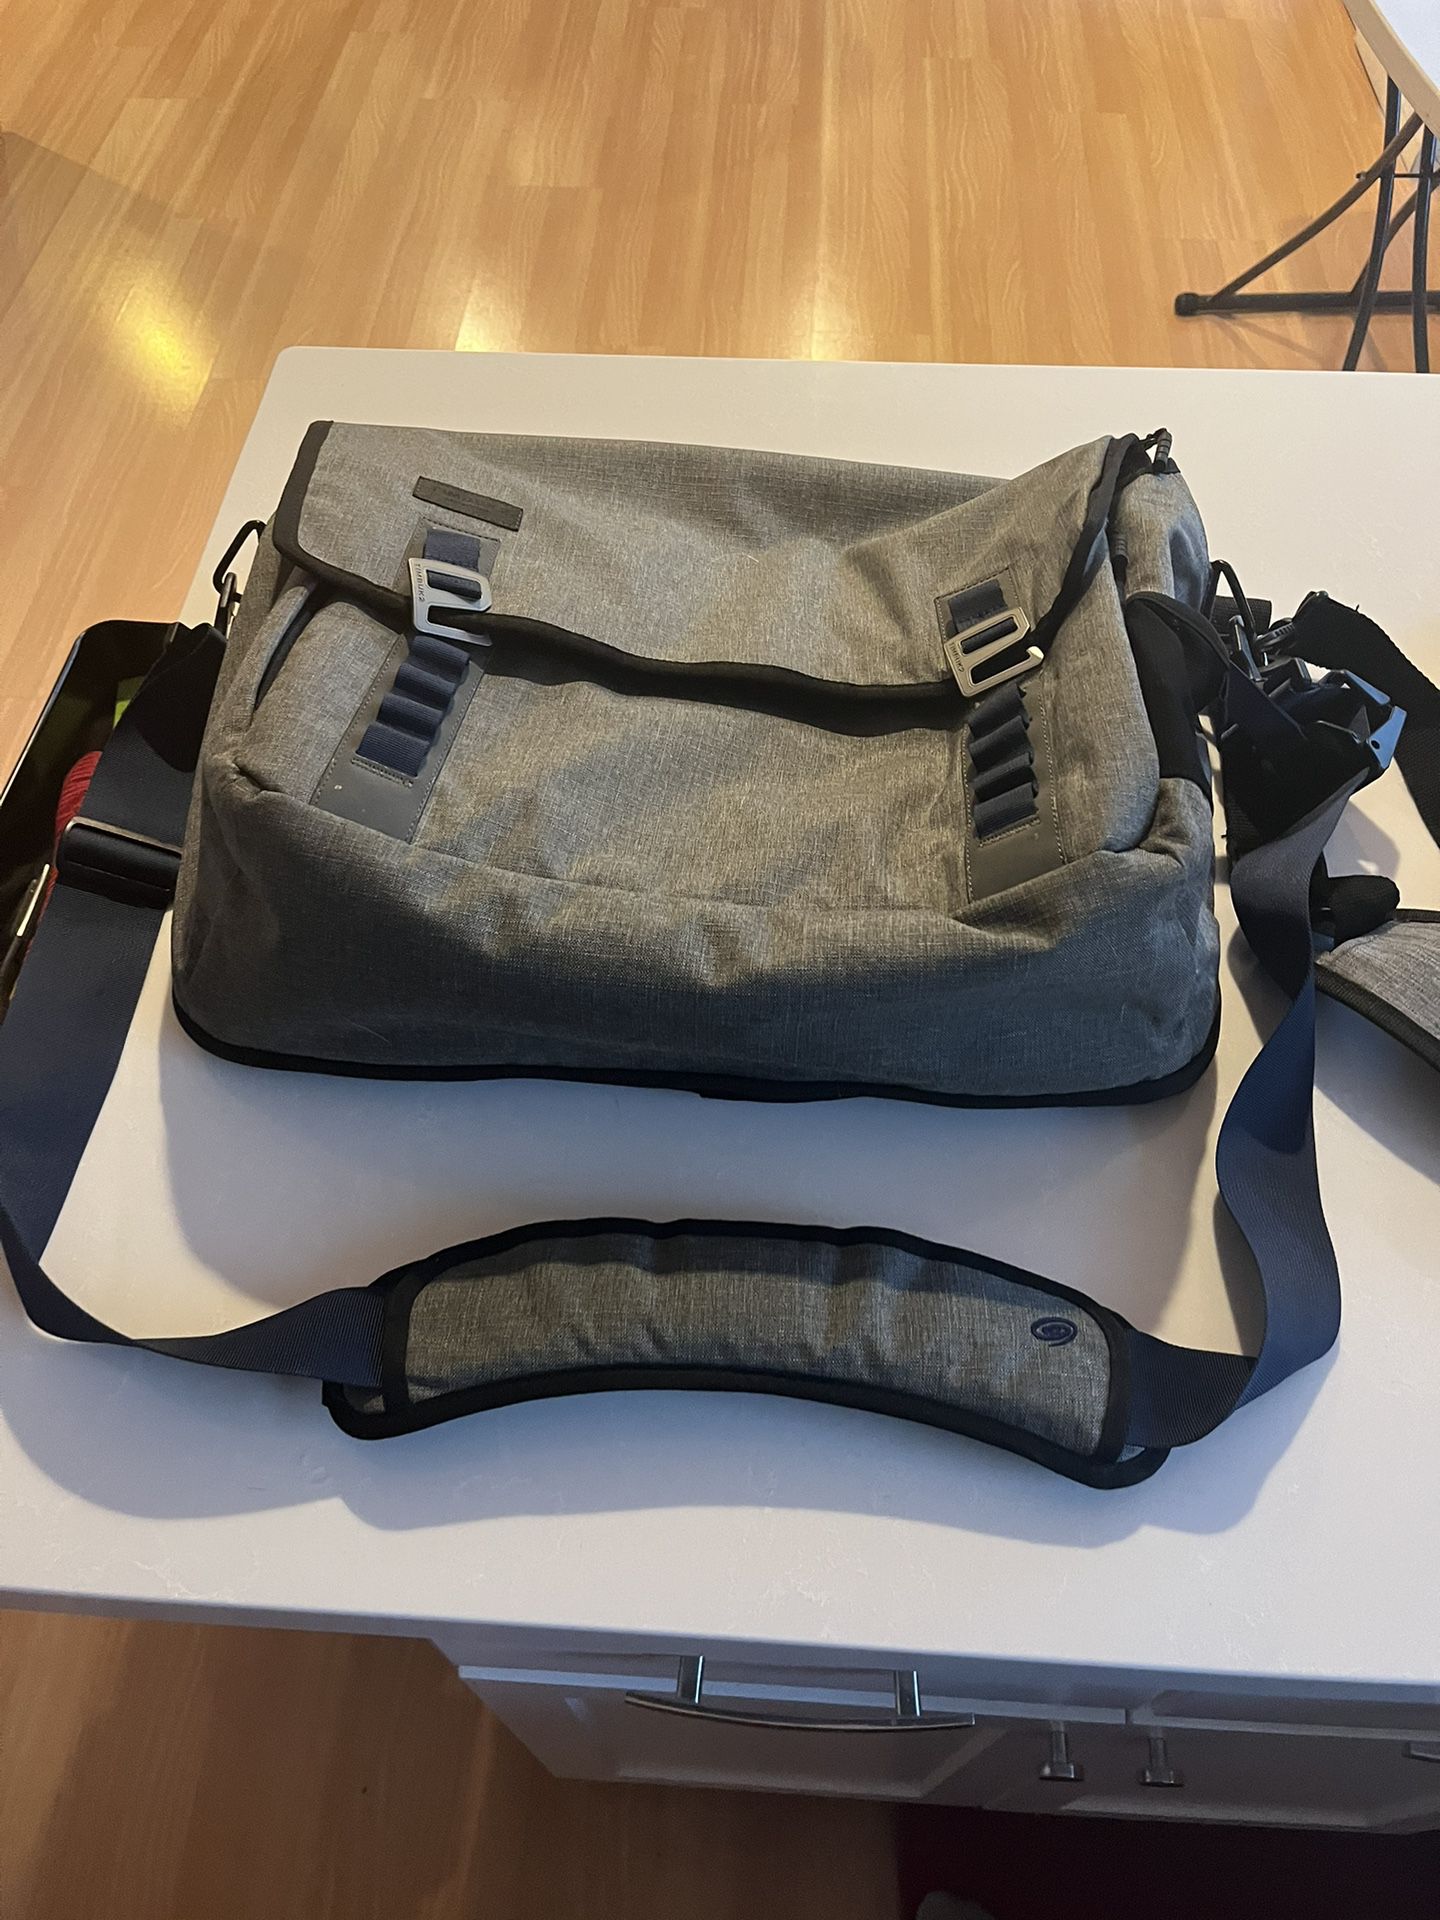 Timbuk2 Command Laptop Messenger Bag for Sale in San Diego, CA